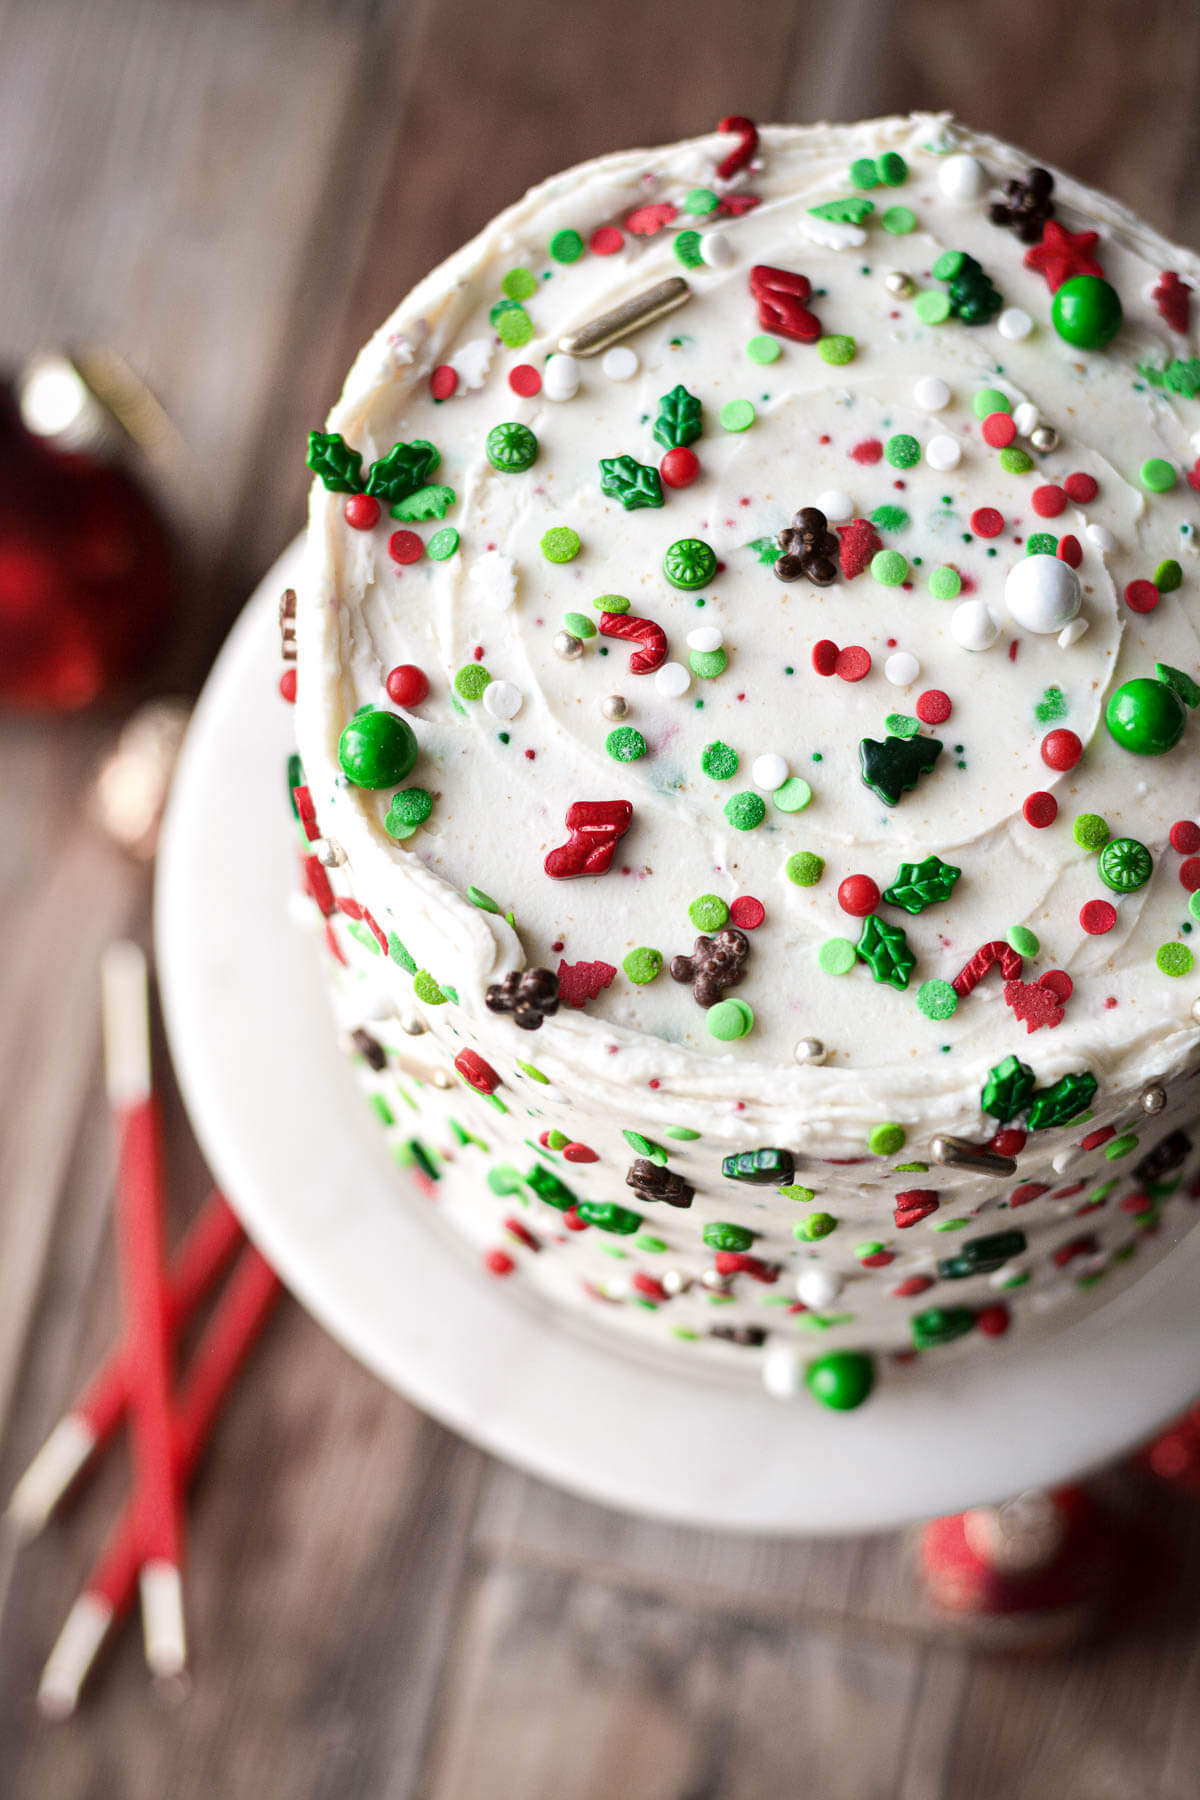 Christmas sprinkles covering a layer cake.